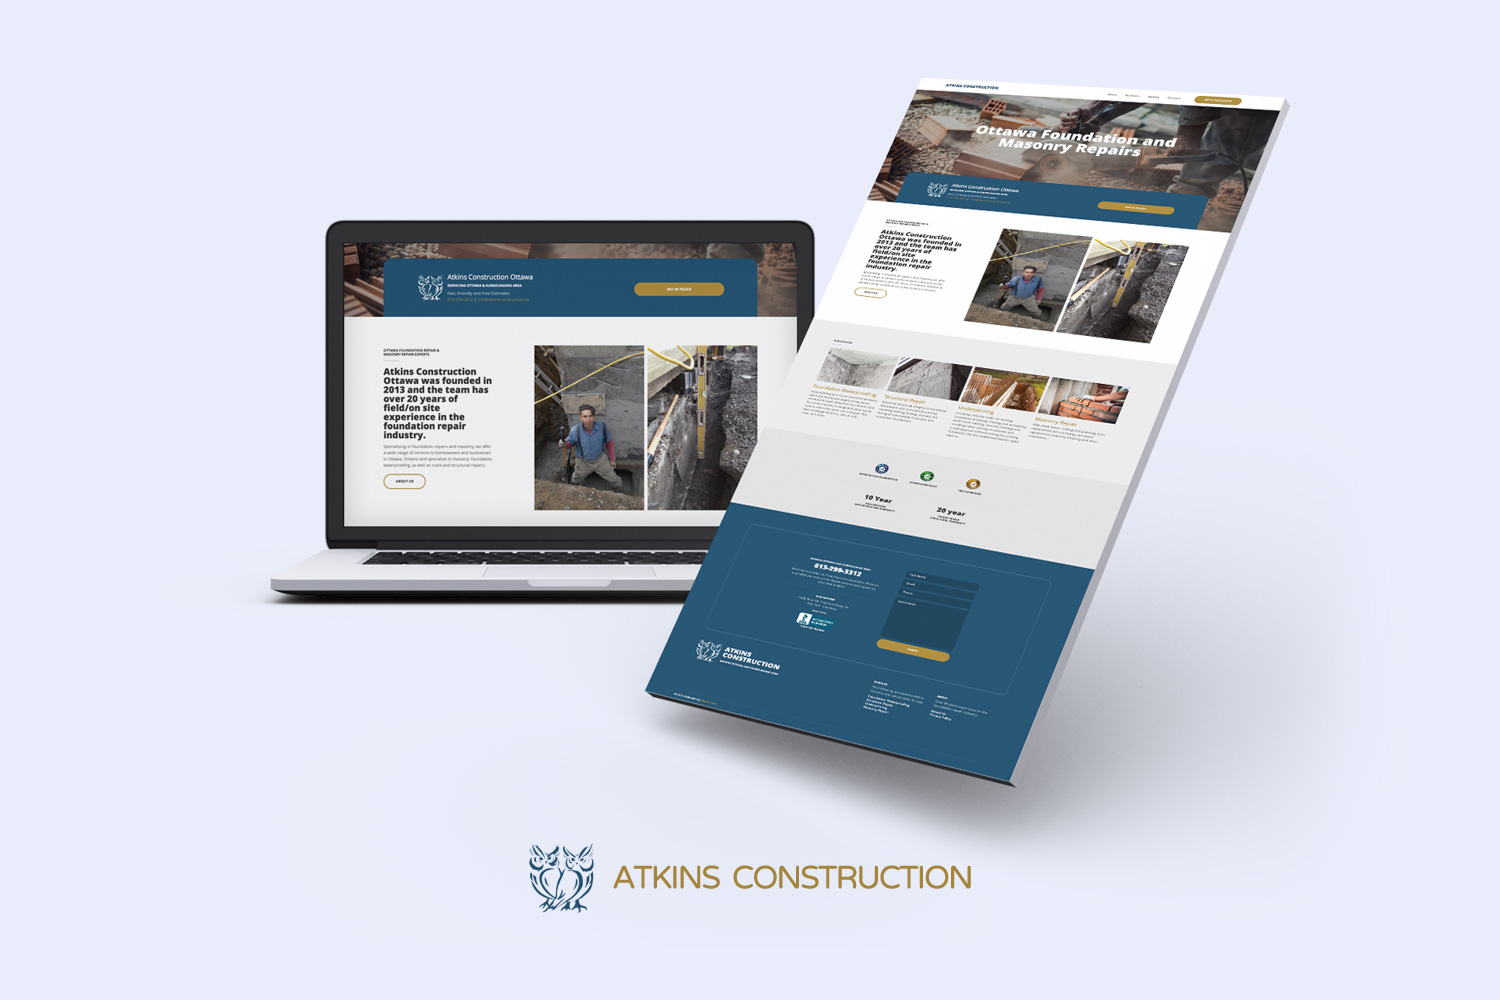 Get a better construction or trade related website design